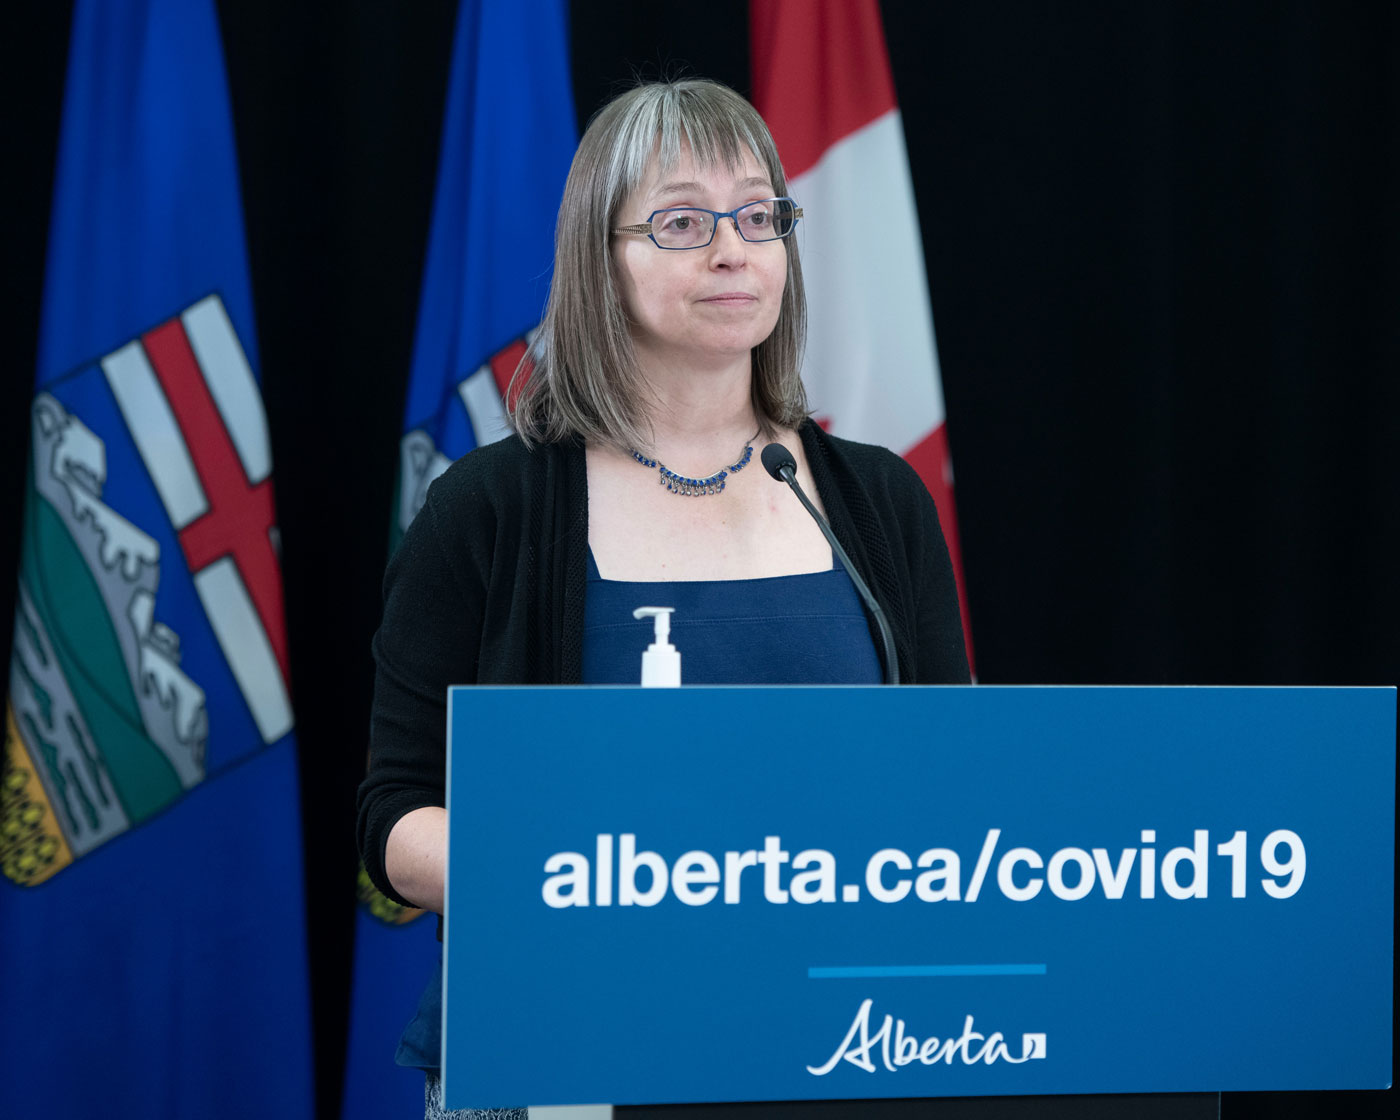 New-vaccine-requirements-and-COVID-19-measures-in-place-in-Alberta-pic-1